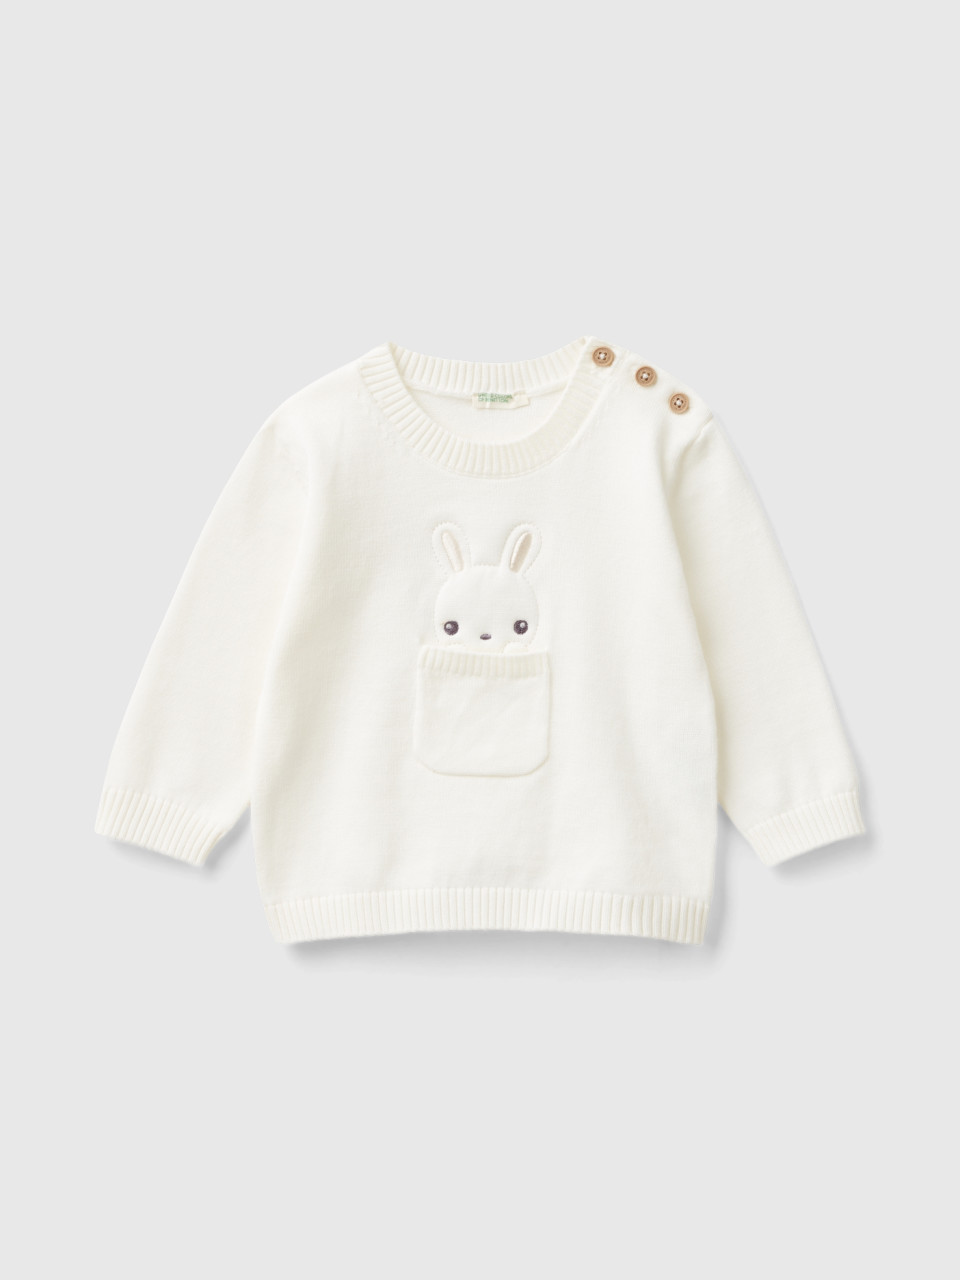 Benetton, T-shirt With Pocket And Bunny, Creamy White, Kids